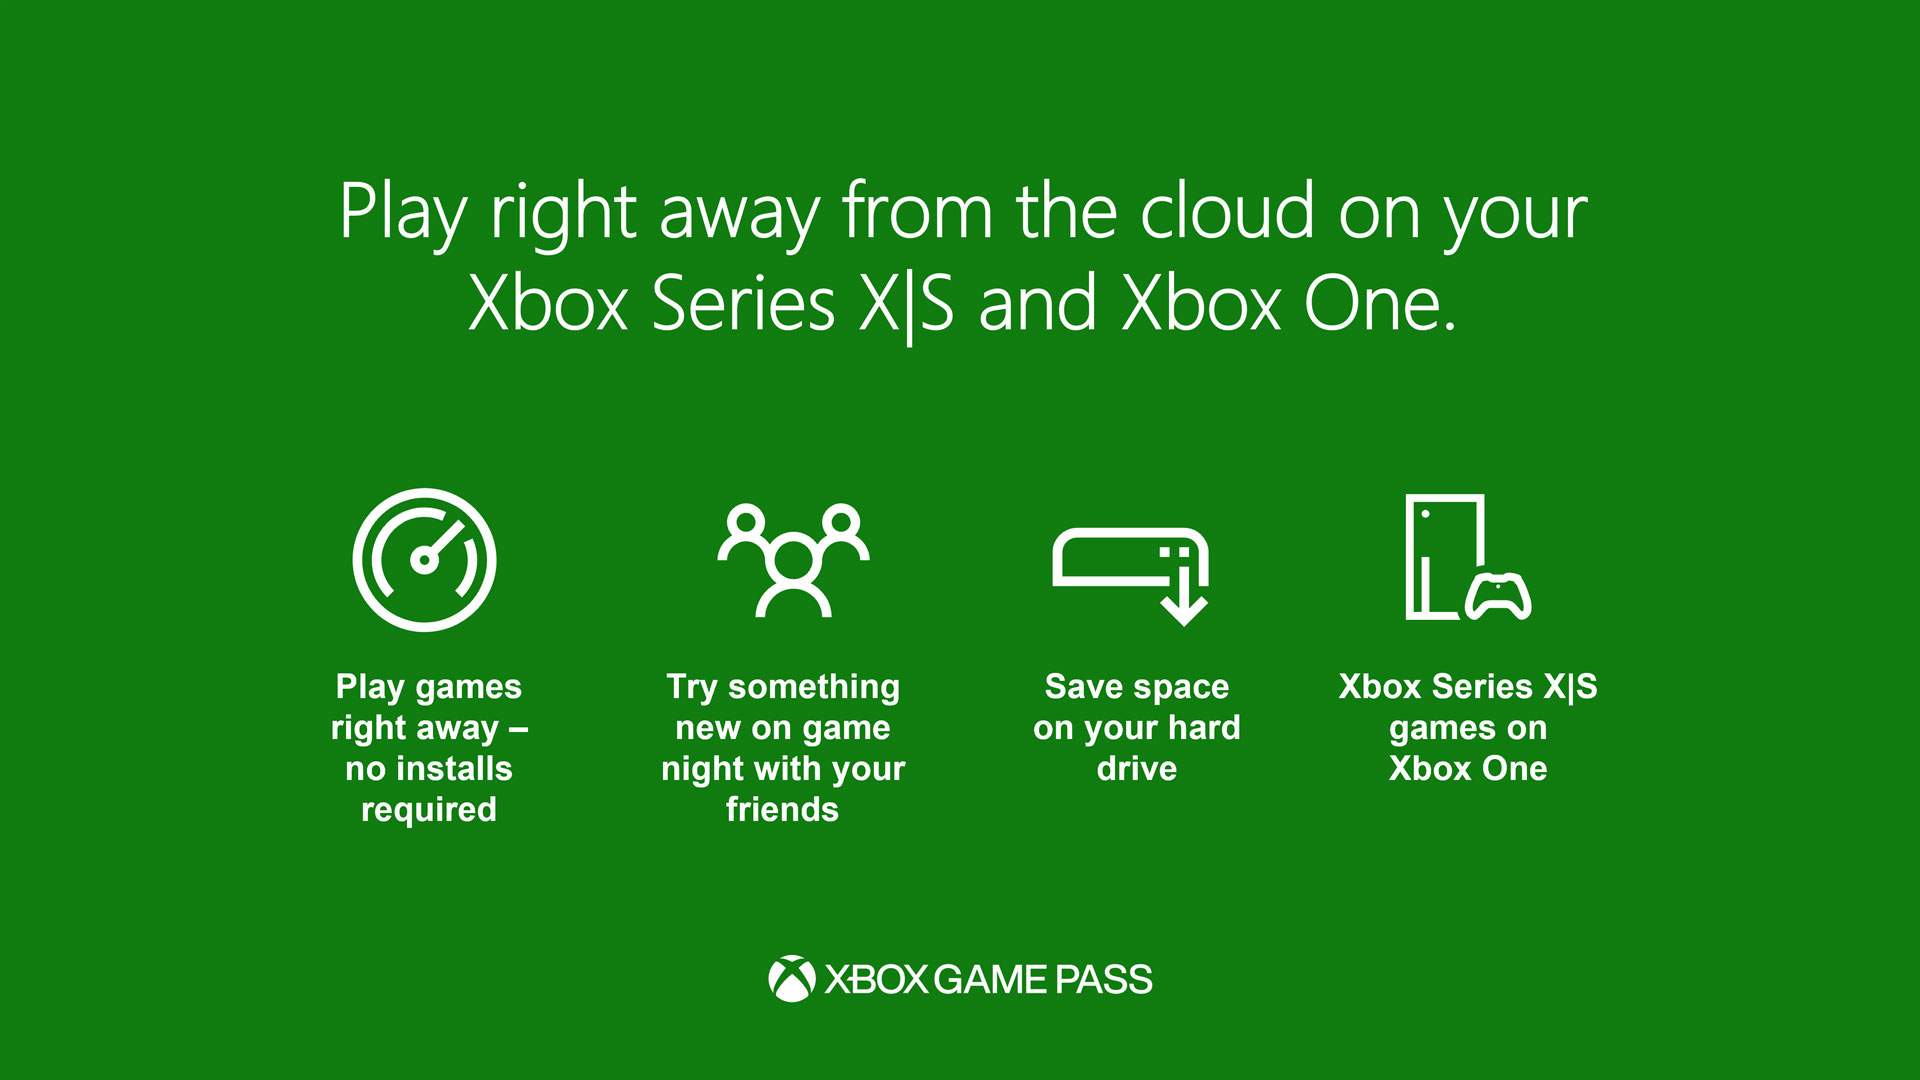 Xbox Cloud Gaming is available to all Xbox Game Pass Ultimate